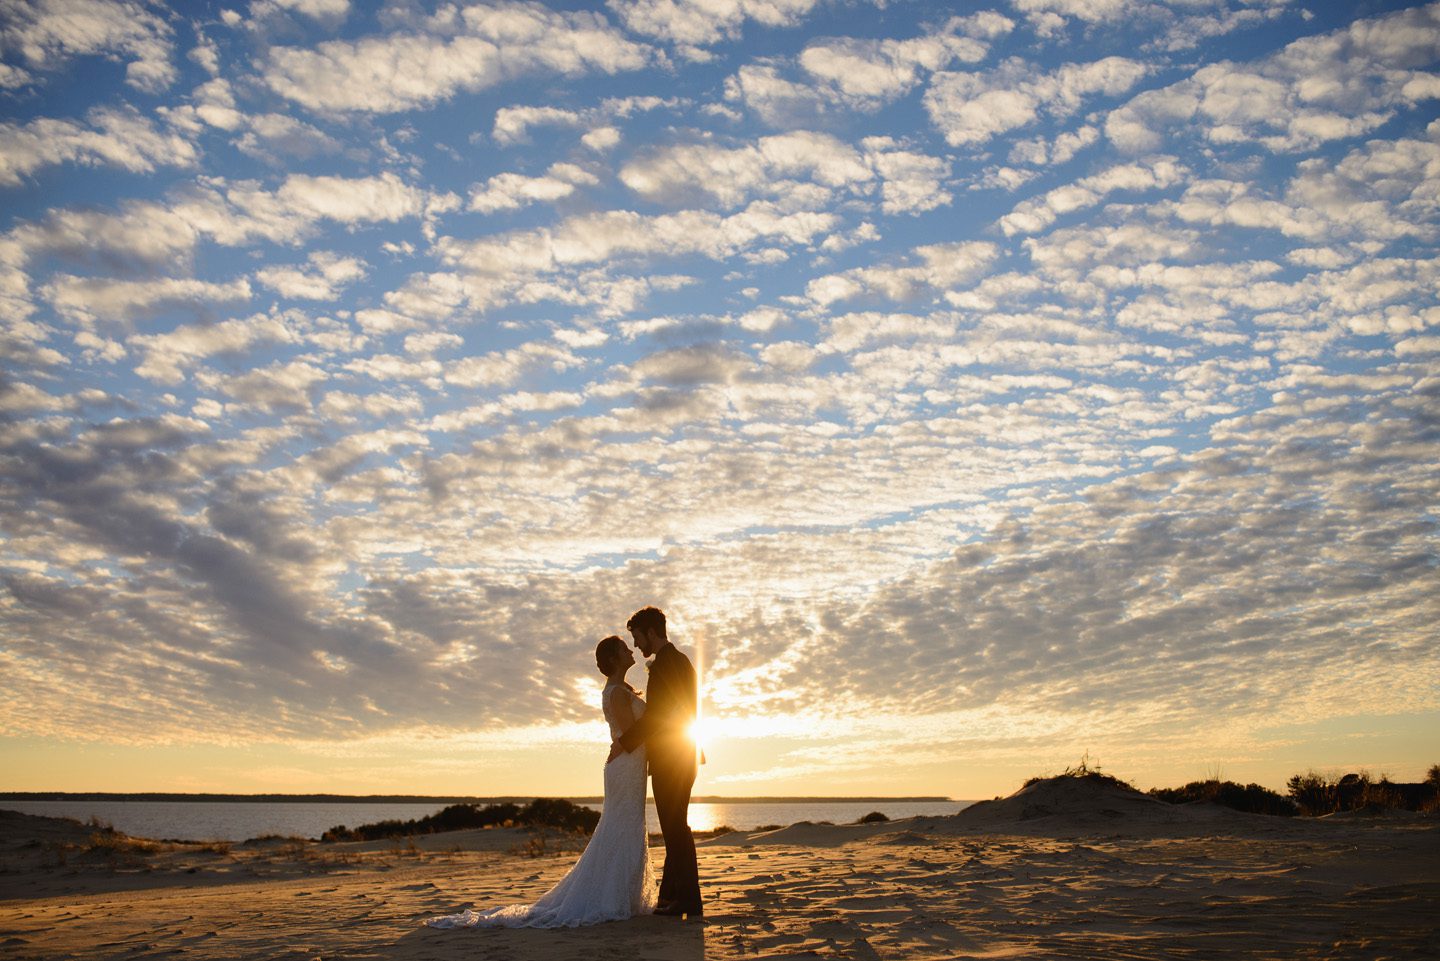 Sanctuary Vineyards Outer Banks Jockey's Ridge wedding photographer by Neil GT Photography sunset clouds